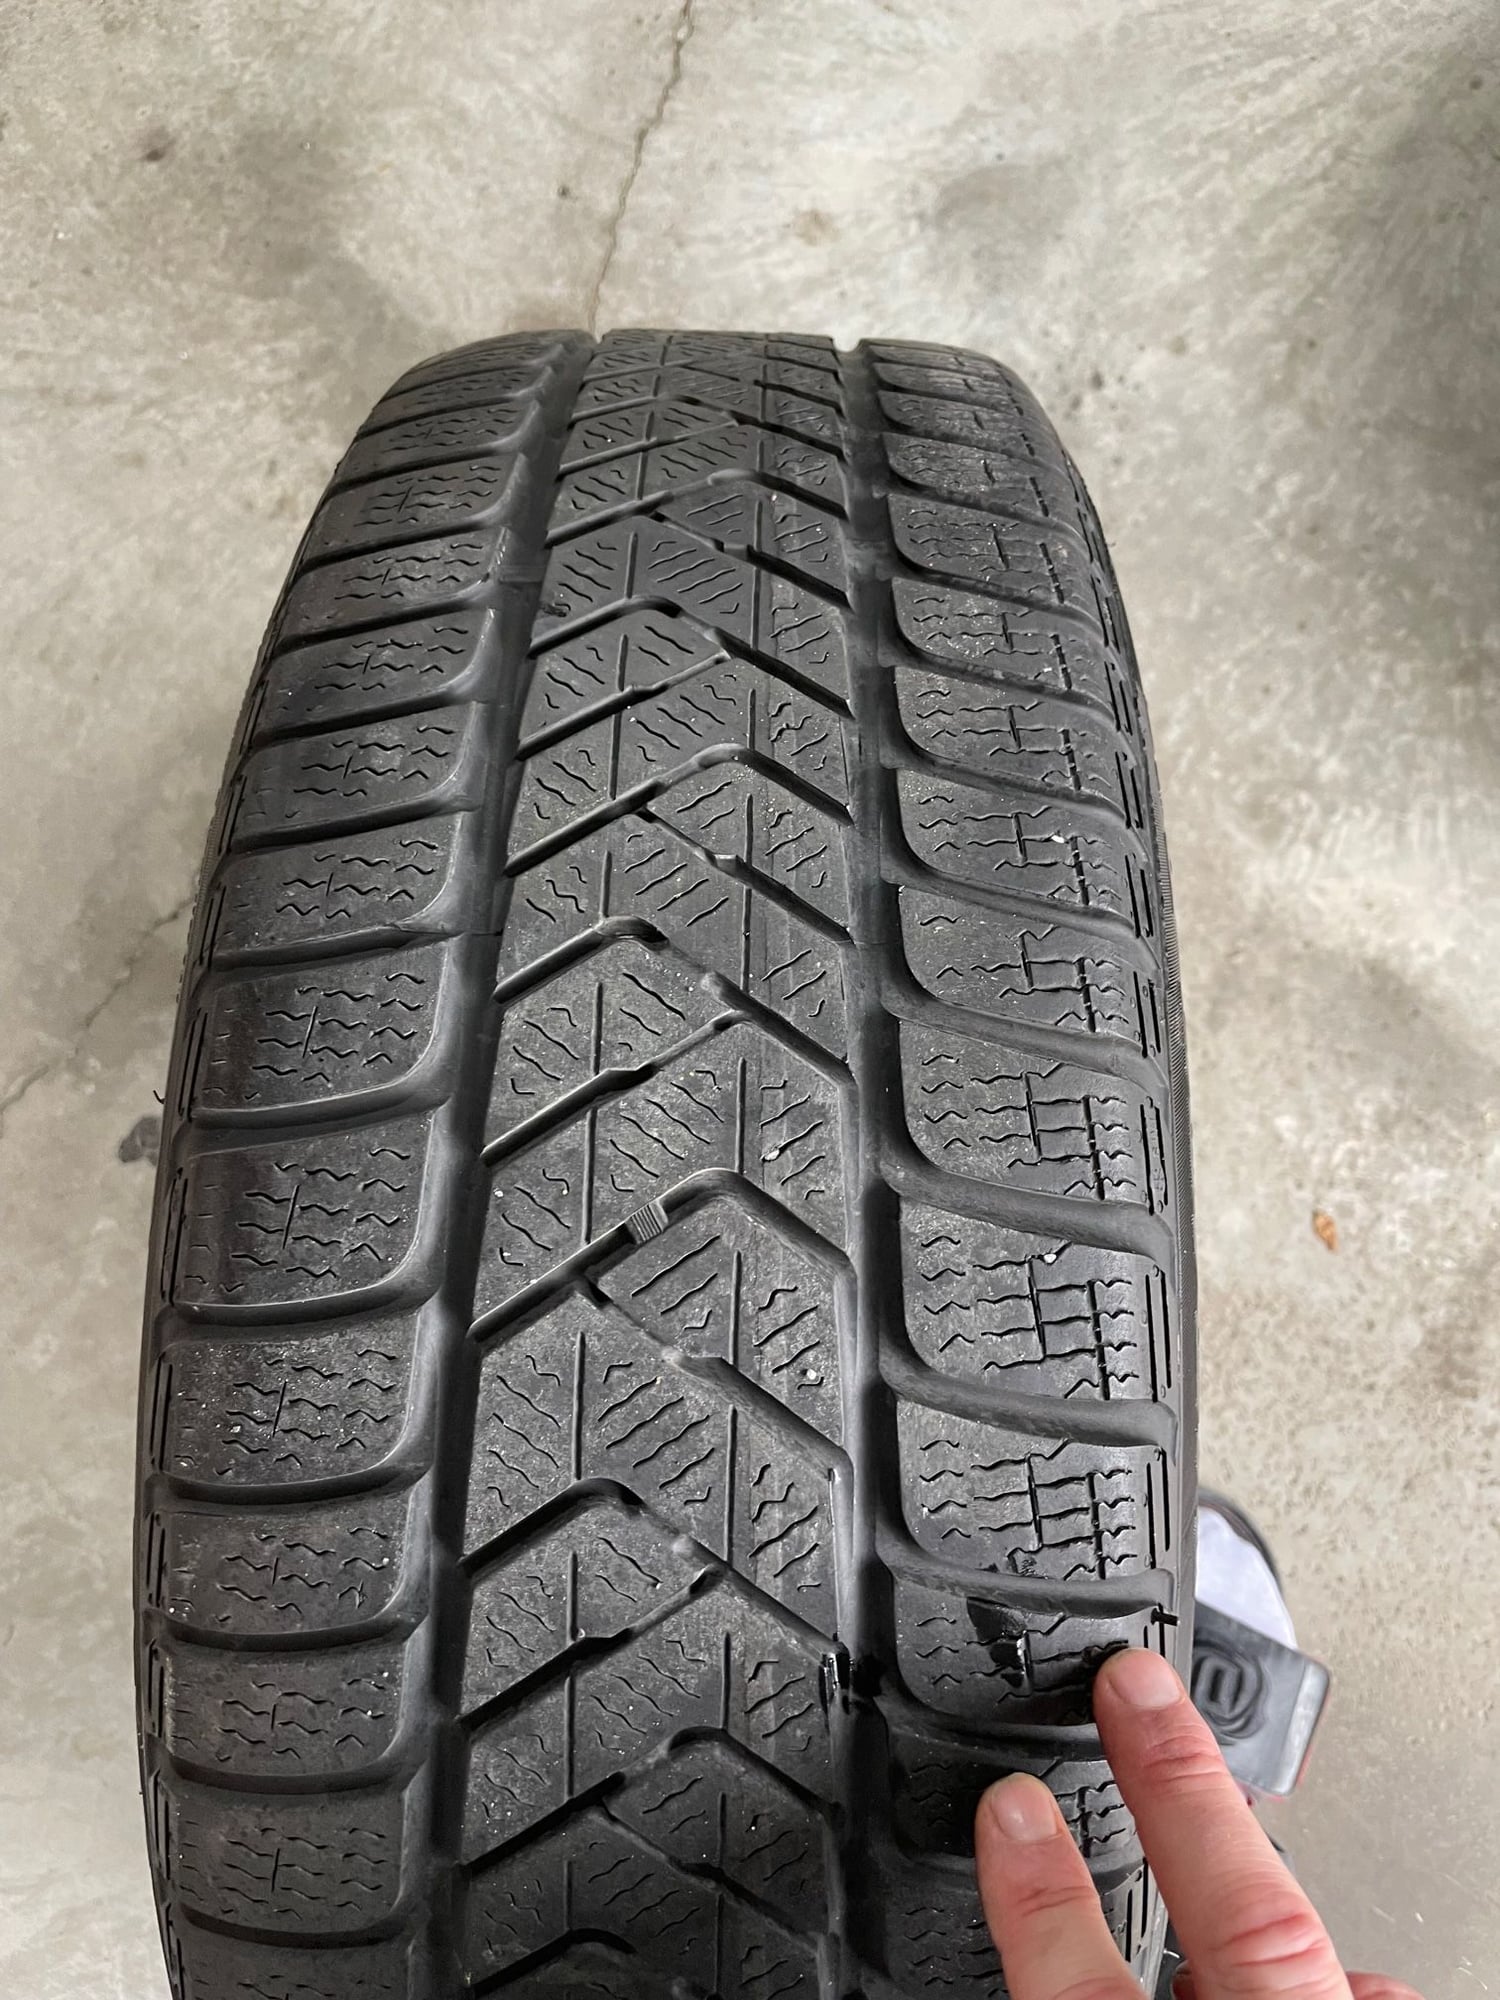 Wheels and Tires/Axles - Used Pirelli SottoZero3 Winter Tires Mounted on AMG Rims for Sale (OEM) - Used - Burlington, ON, Canada